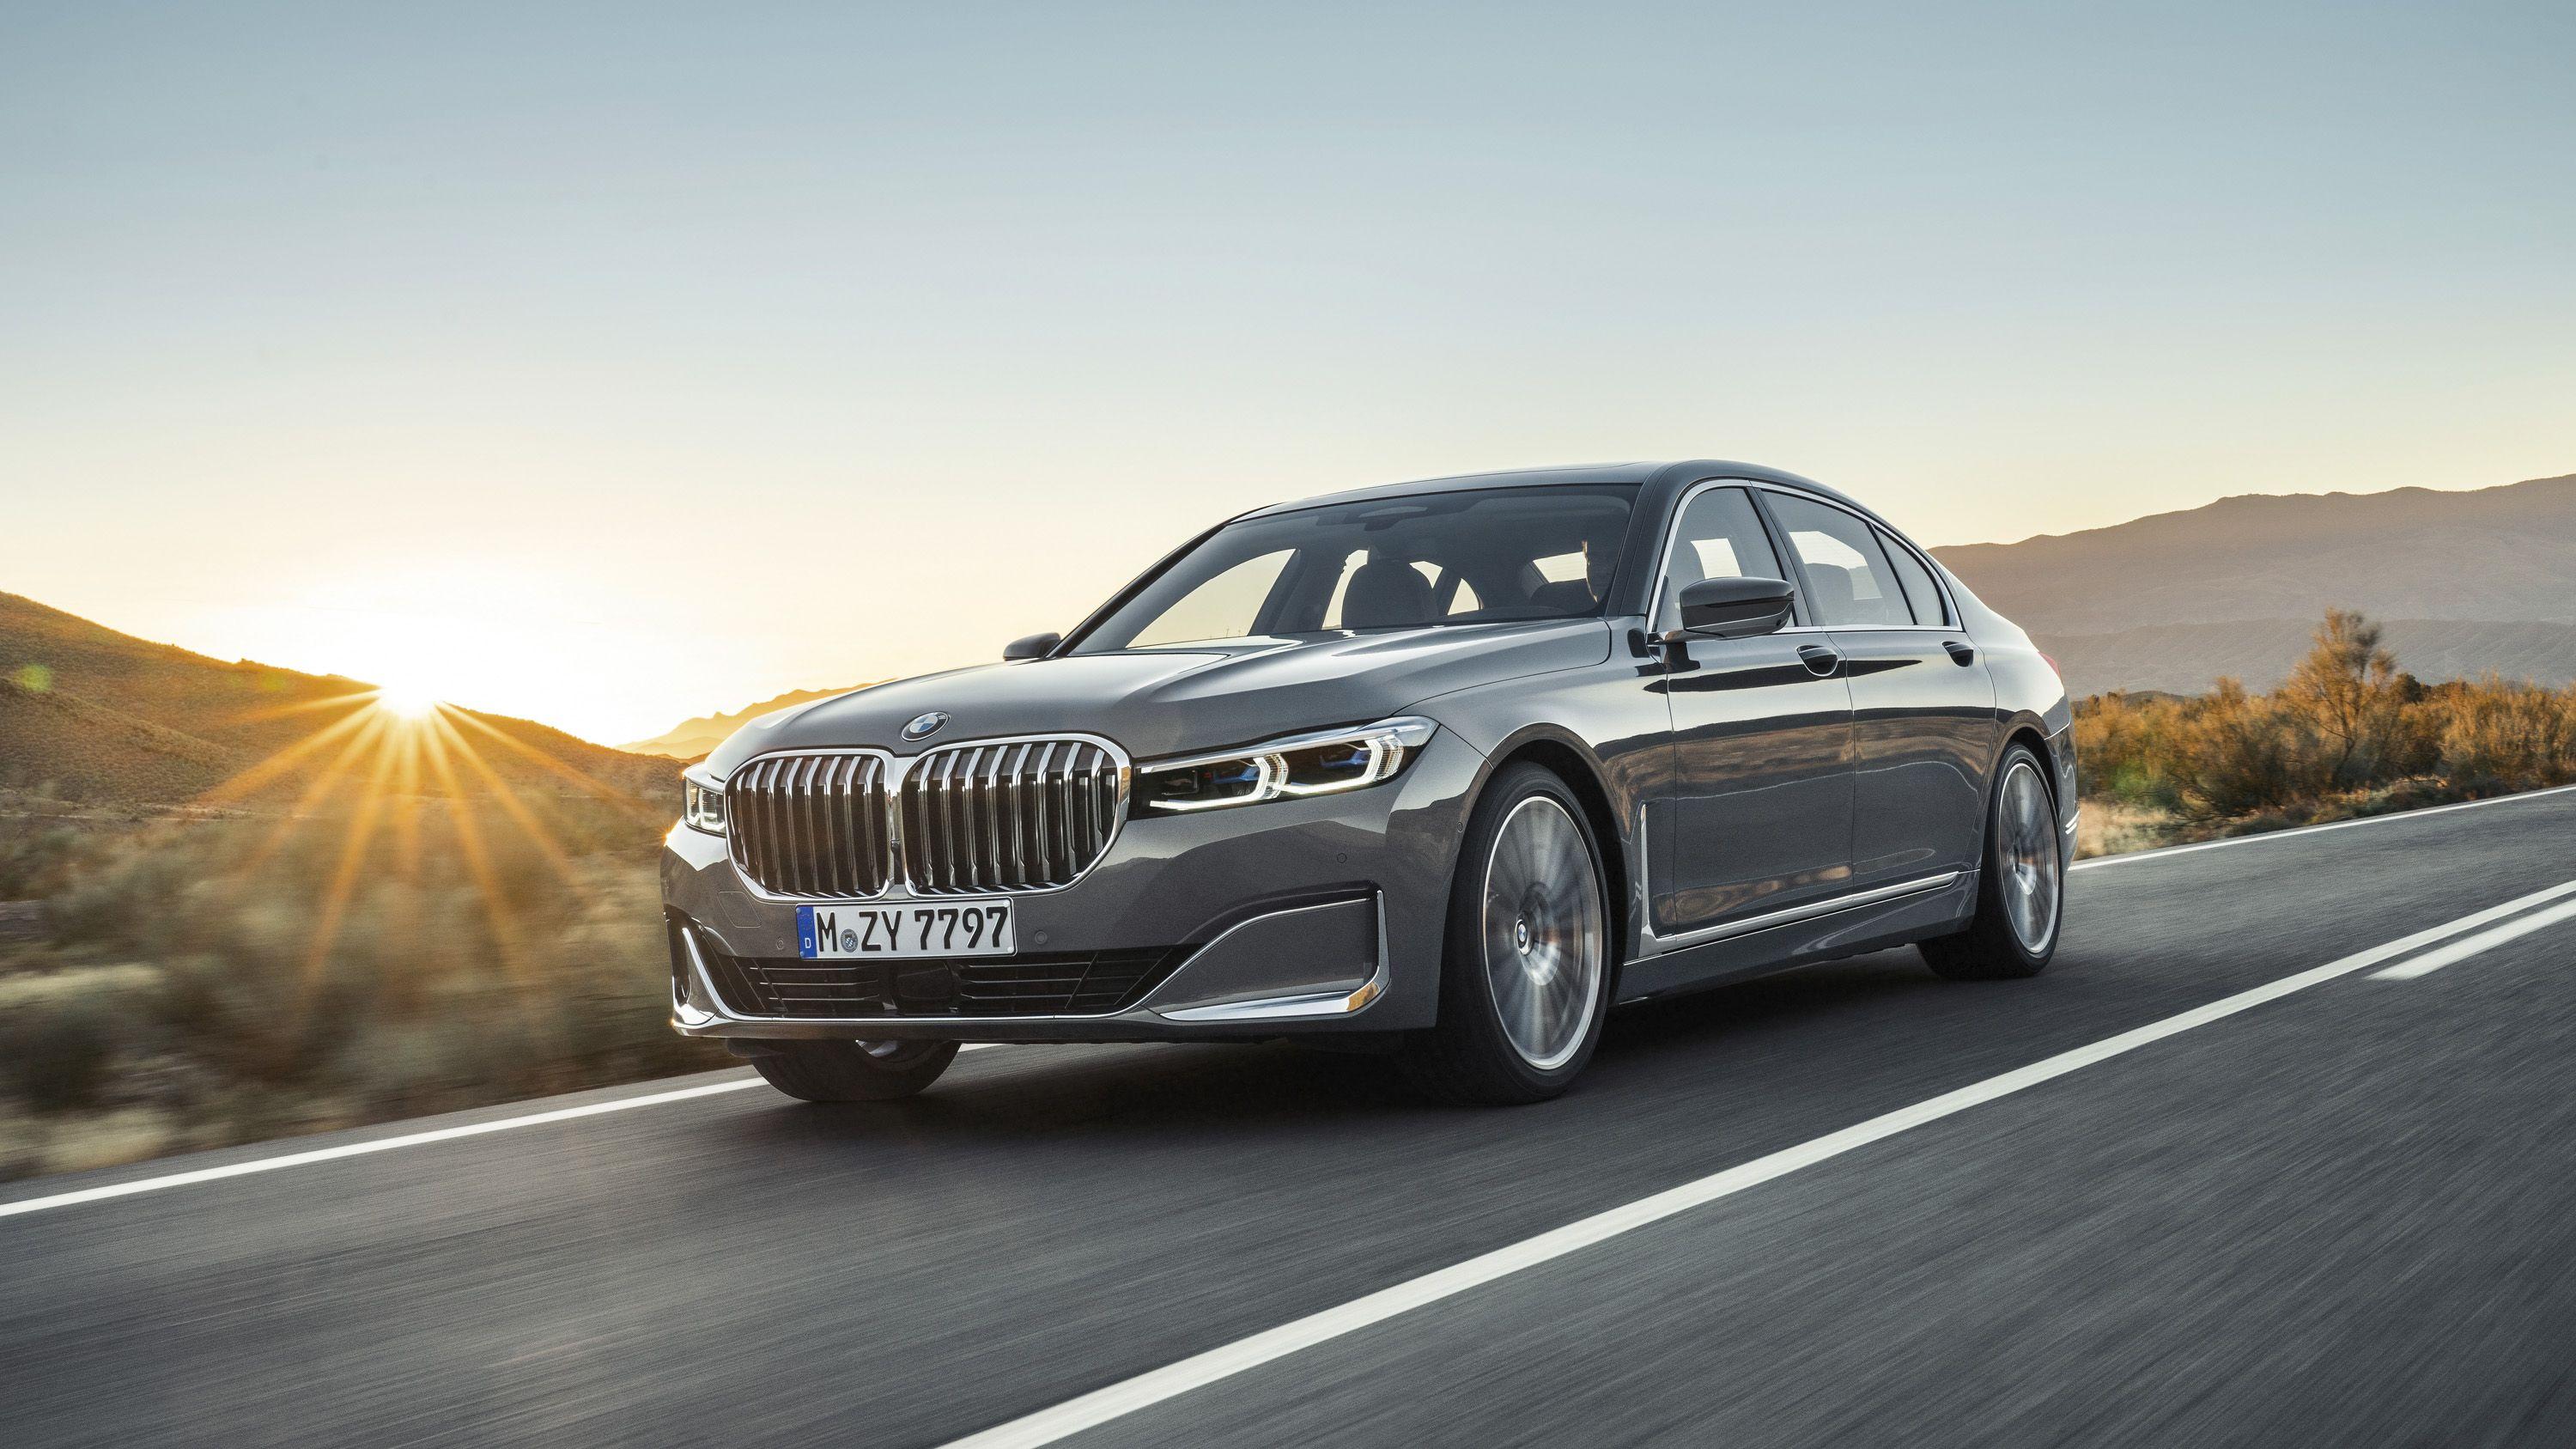 Bmw 7 Series Wallpapers Top Free Bmw 7 Series Backgrounds Wallpaperaccess